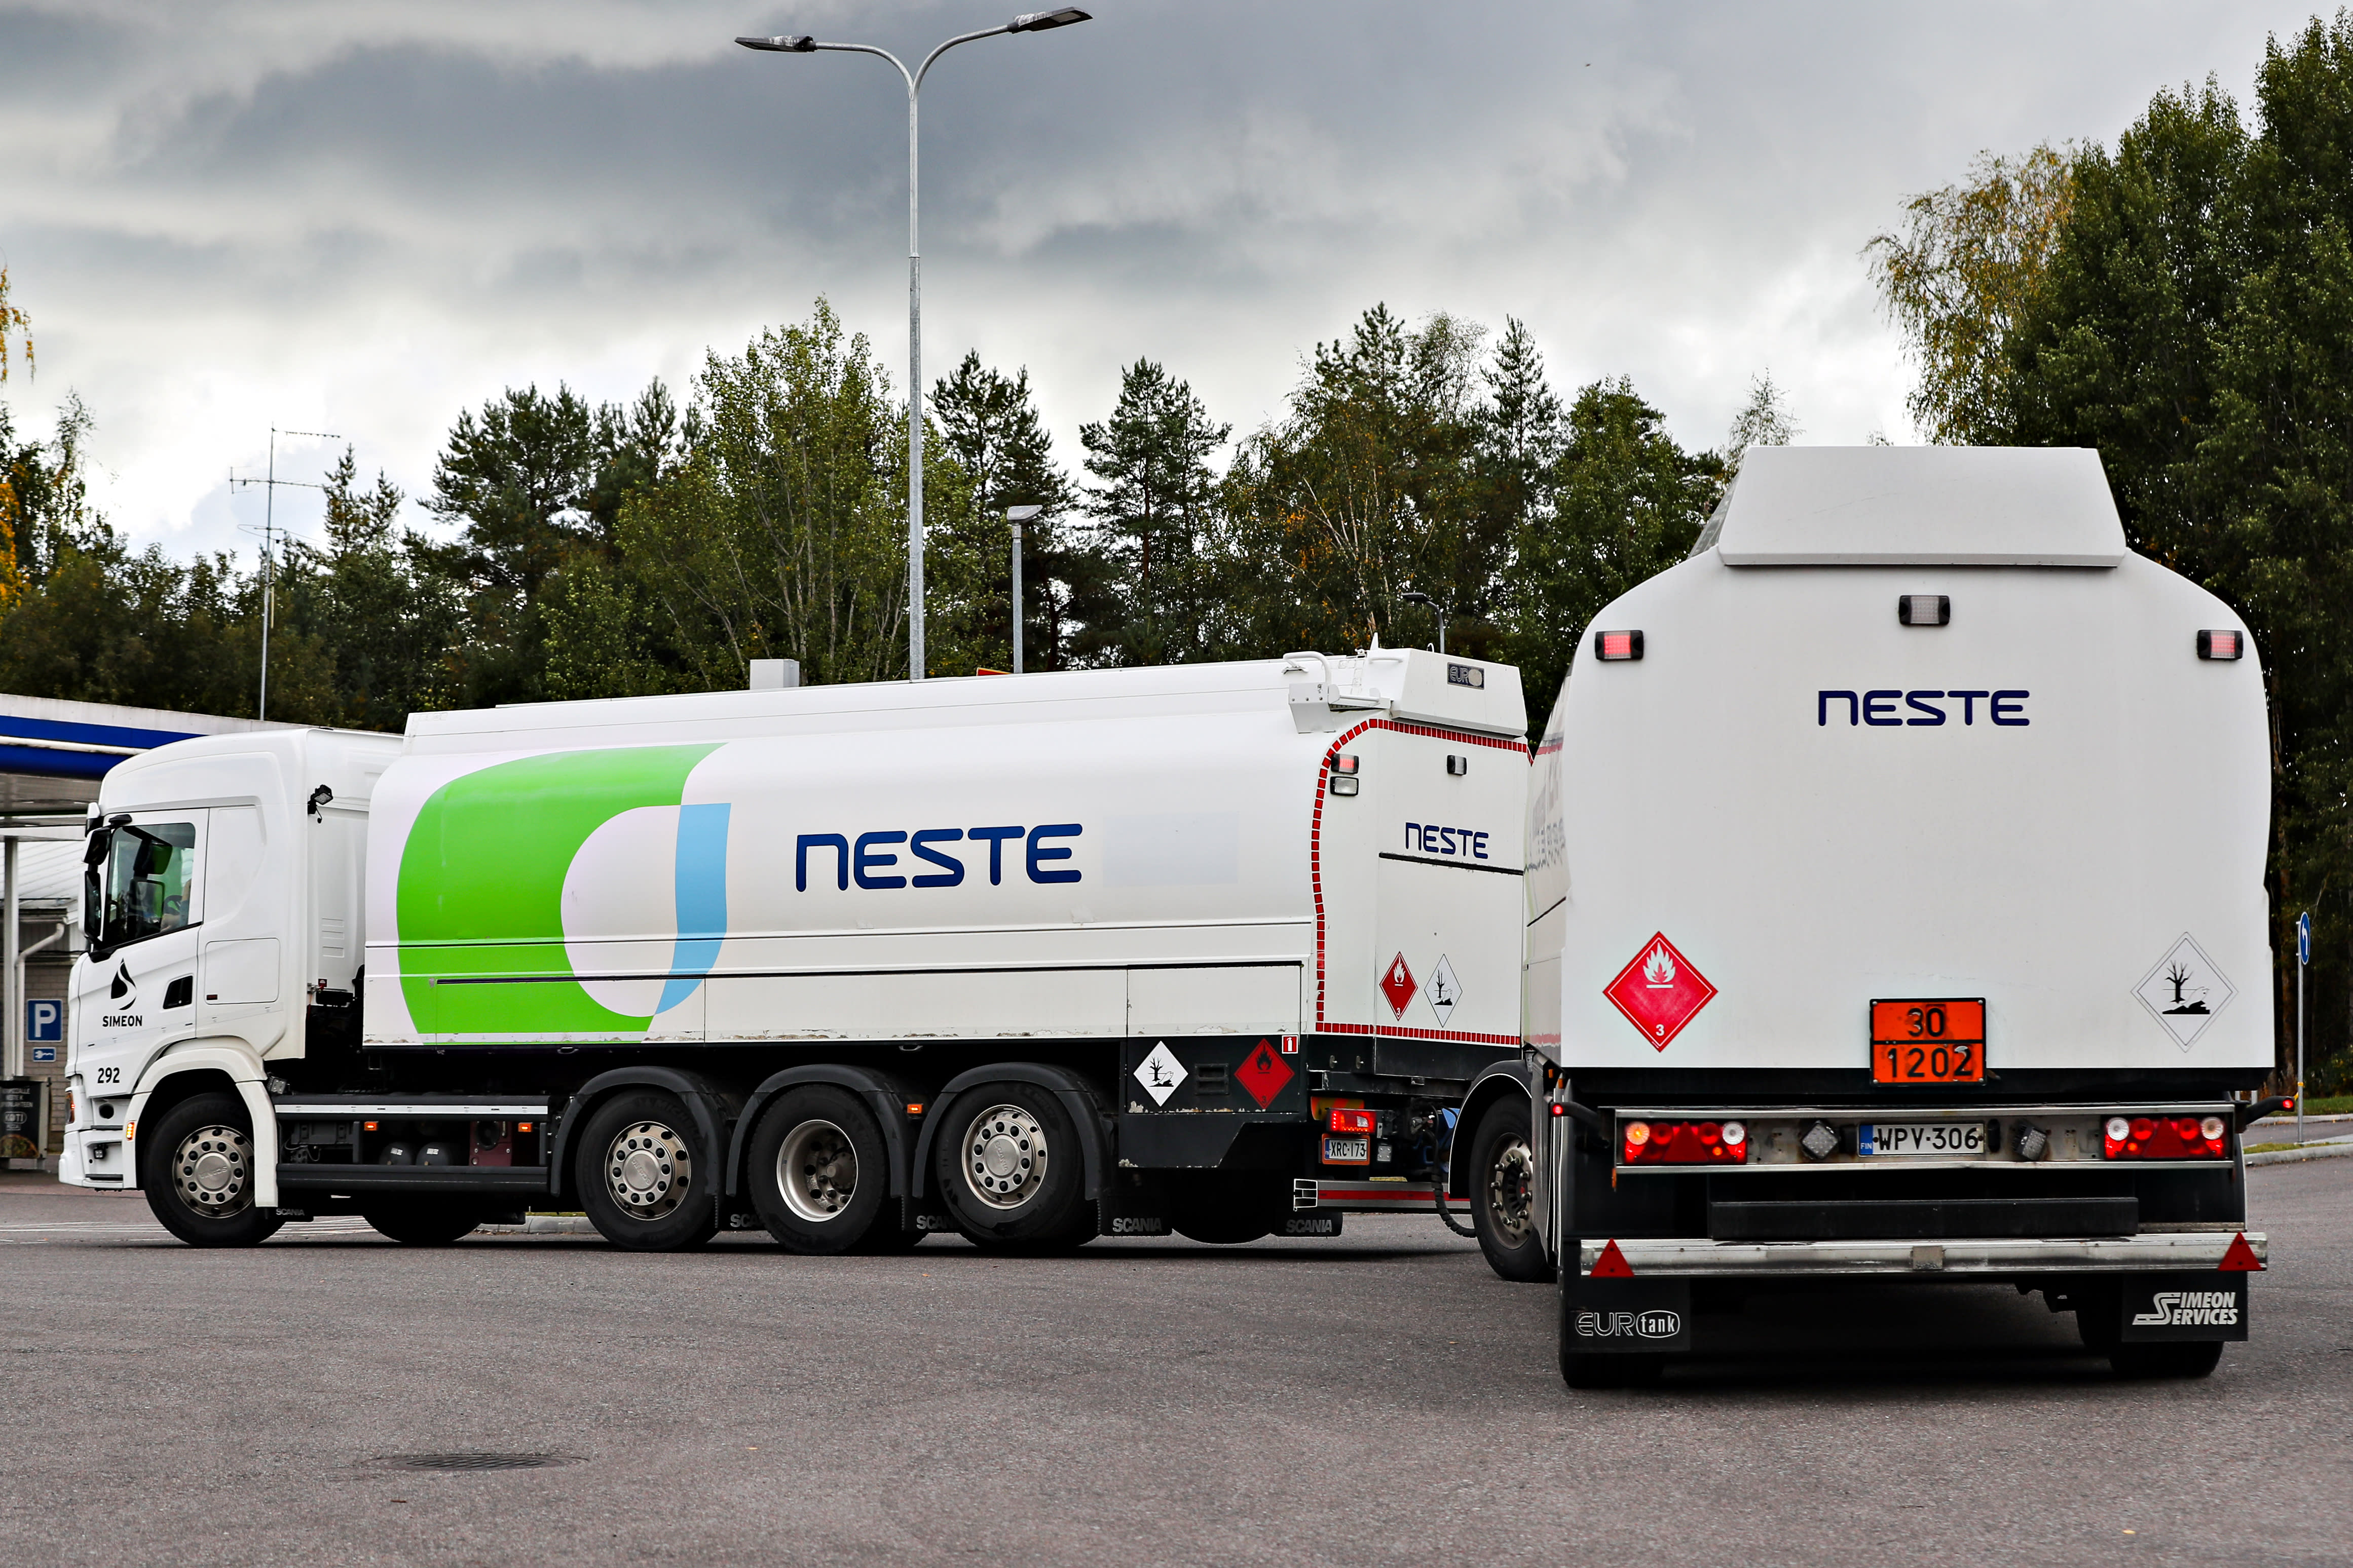 Neste may lay off up to 350 jobs in Finland